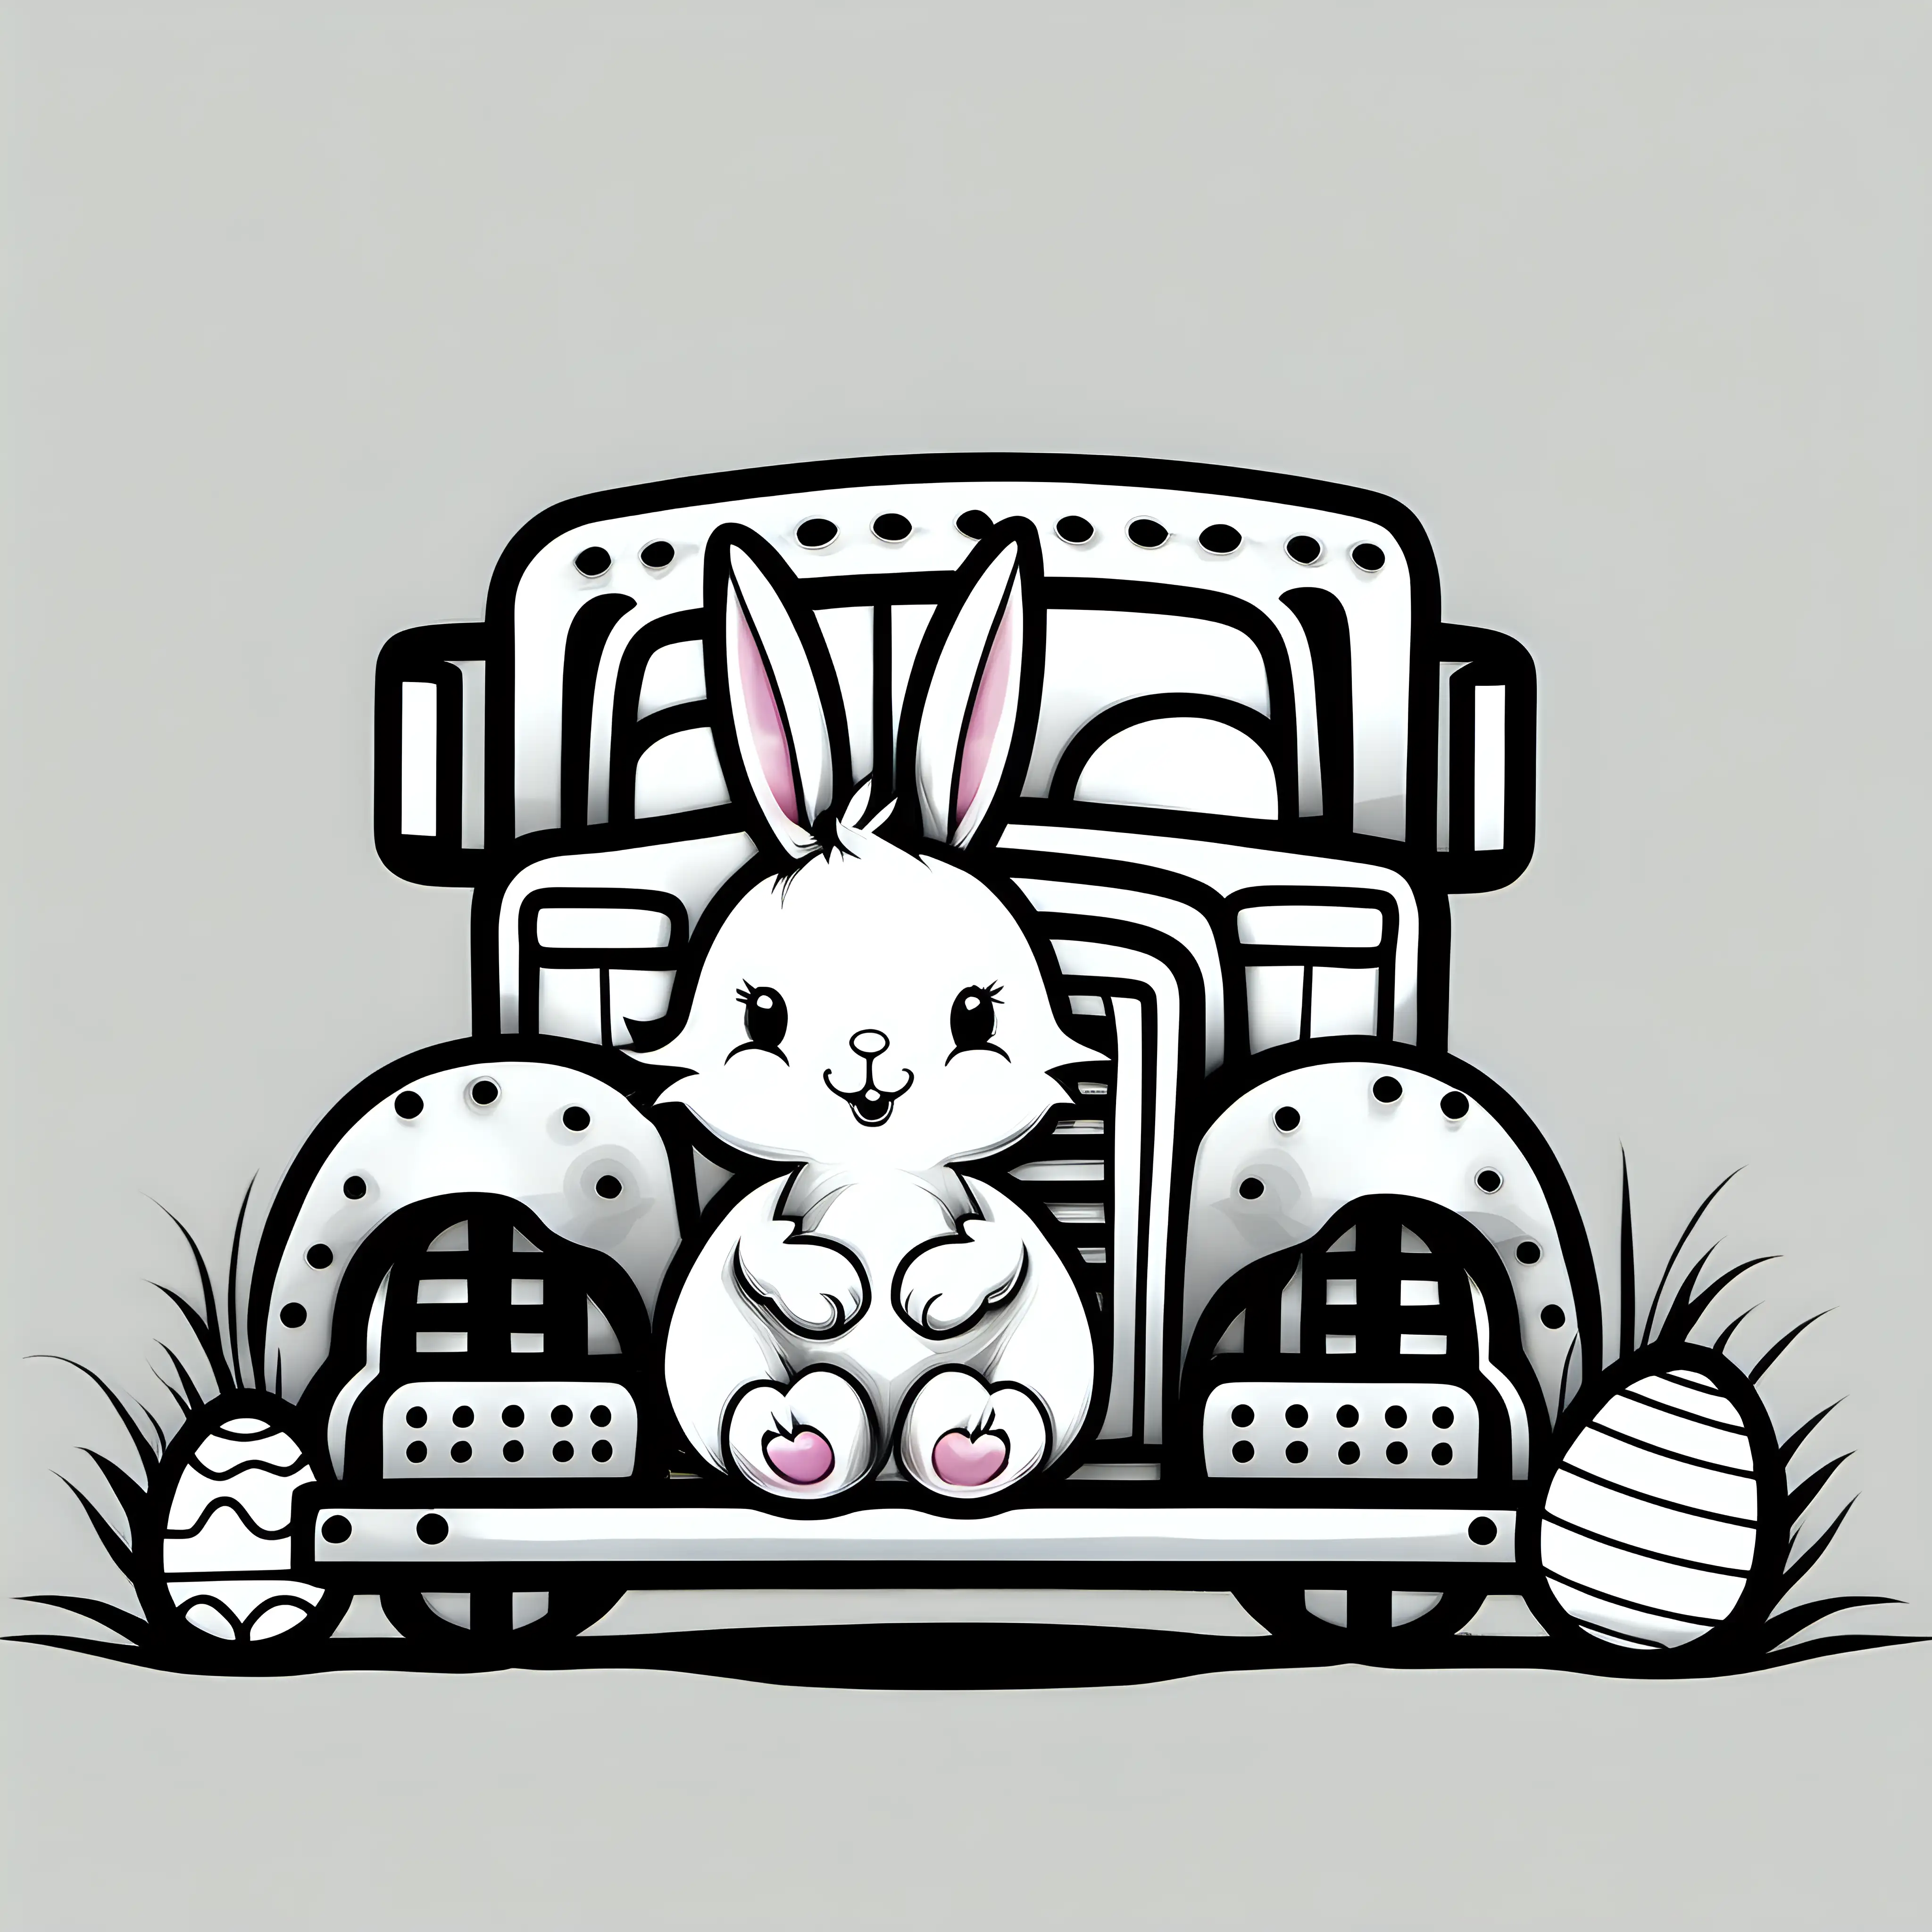 Happy Easter, fuzzy easter Bunny, Truck, black, Thick outline